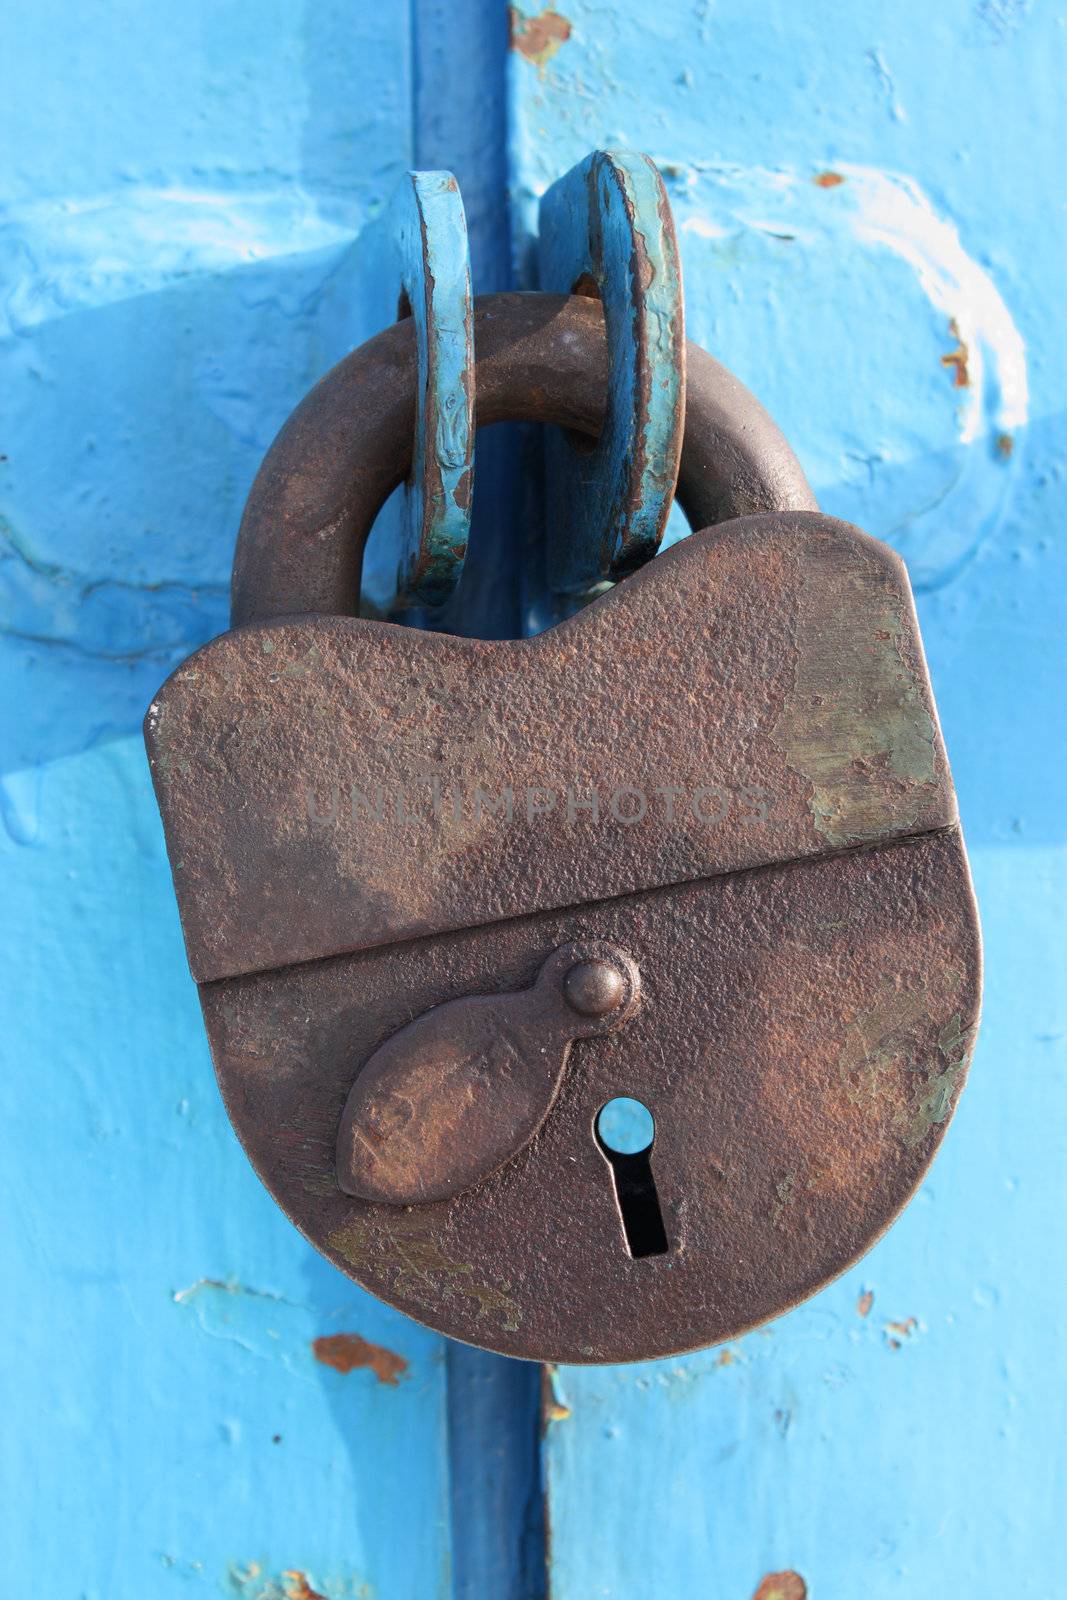 Rustic old padlock on blue background